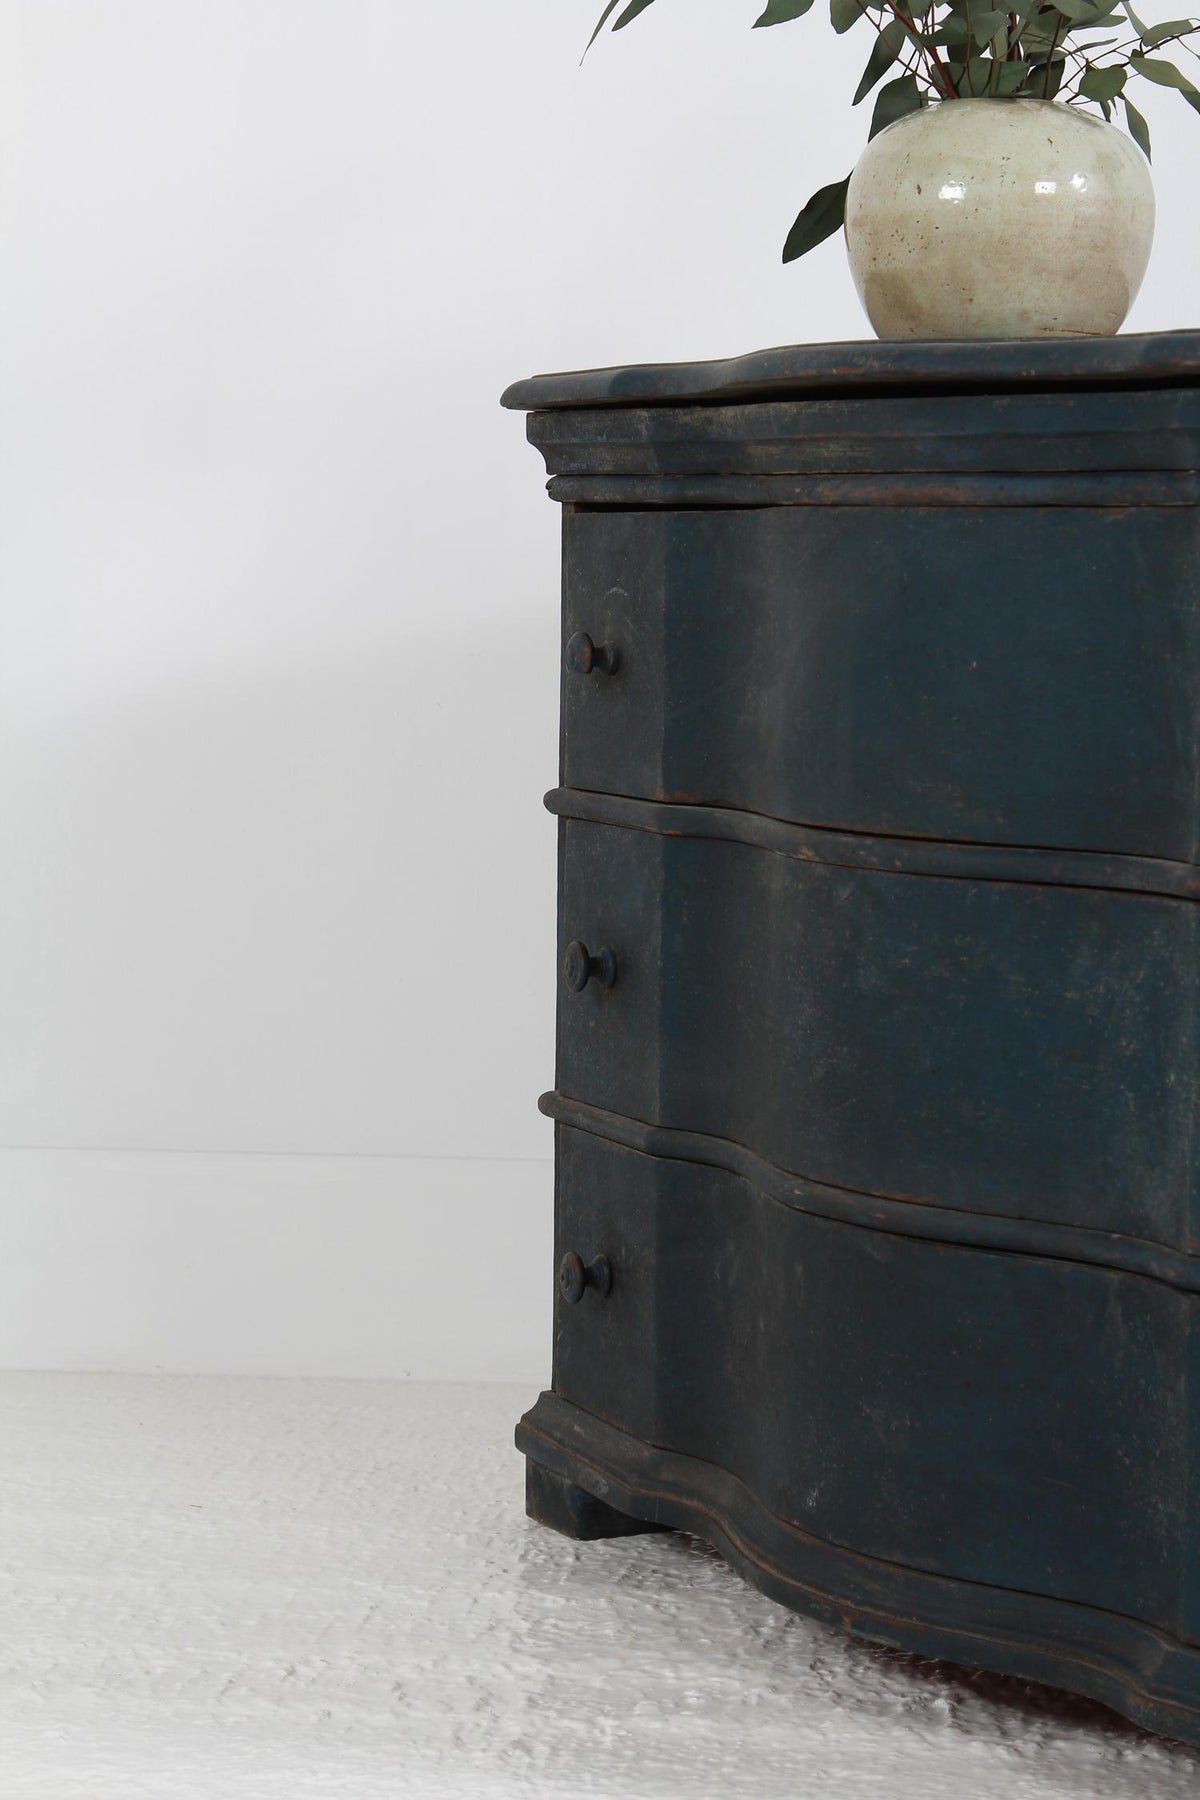 Danish 19thC  Three-Drawer Painted Commode with Serpentine Front